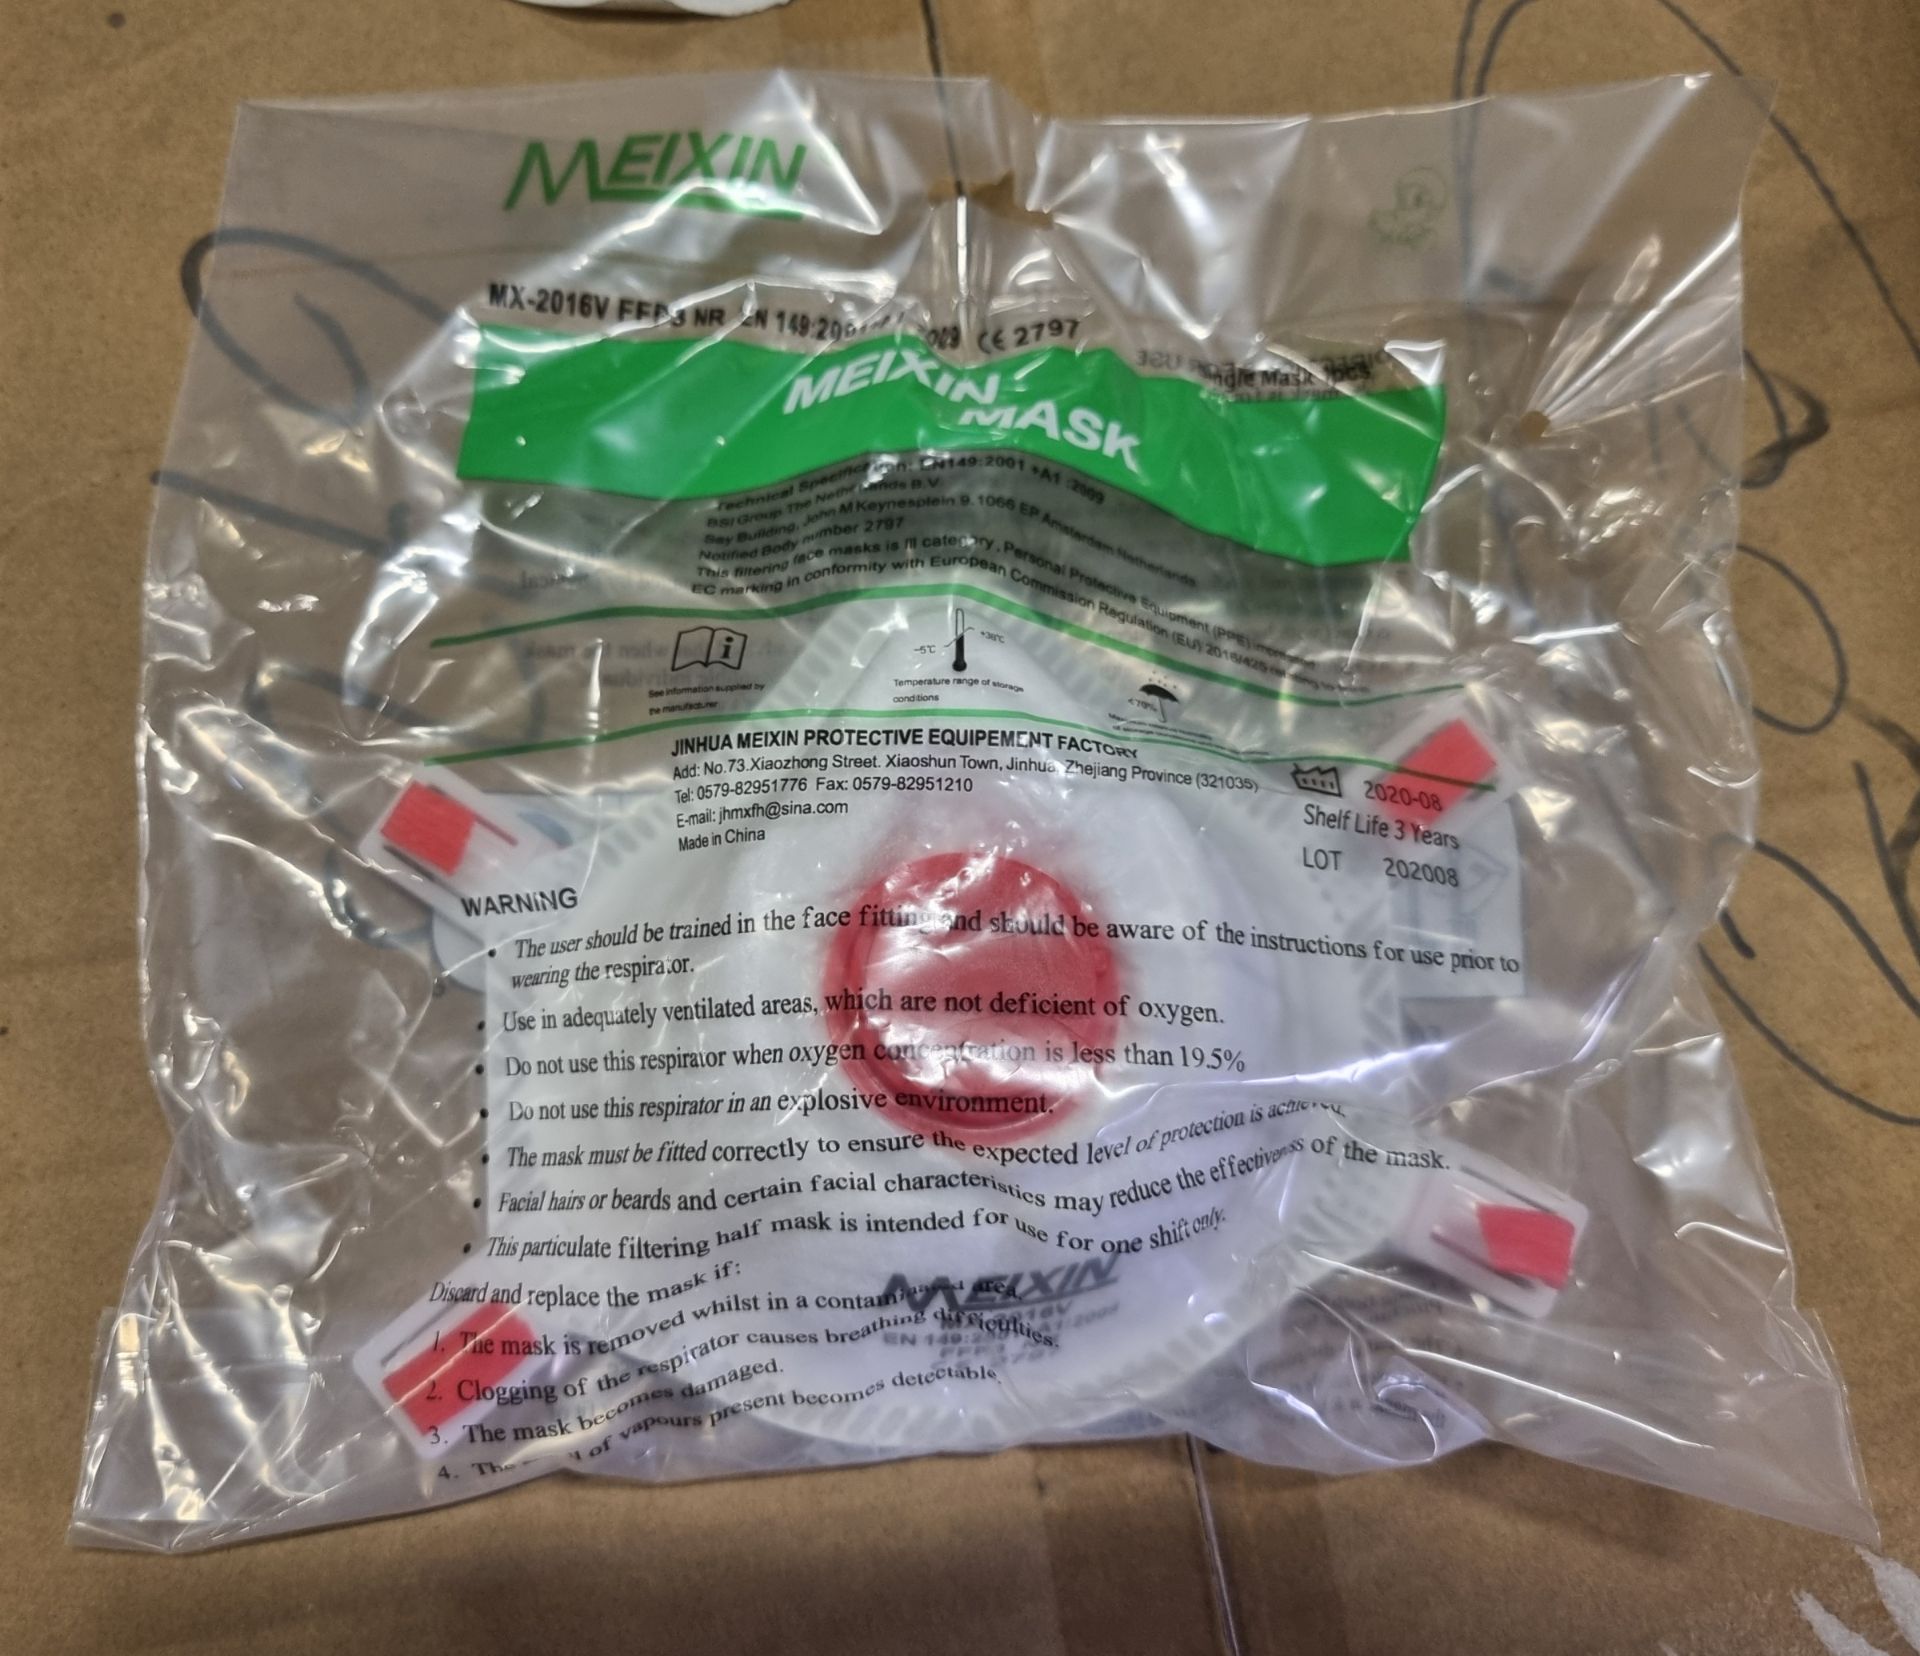 10x boxes of Meixin MX-2016V FFP3 dust mask/respirator - 200 units per box - OUT OF DATE - Image 3 of 4